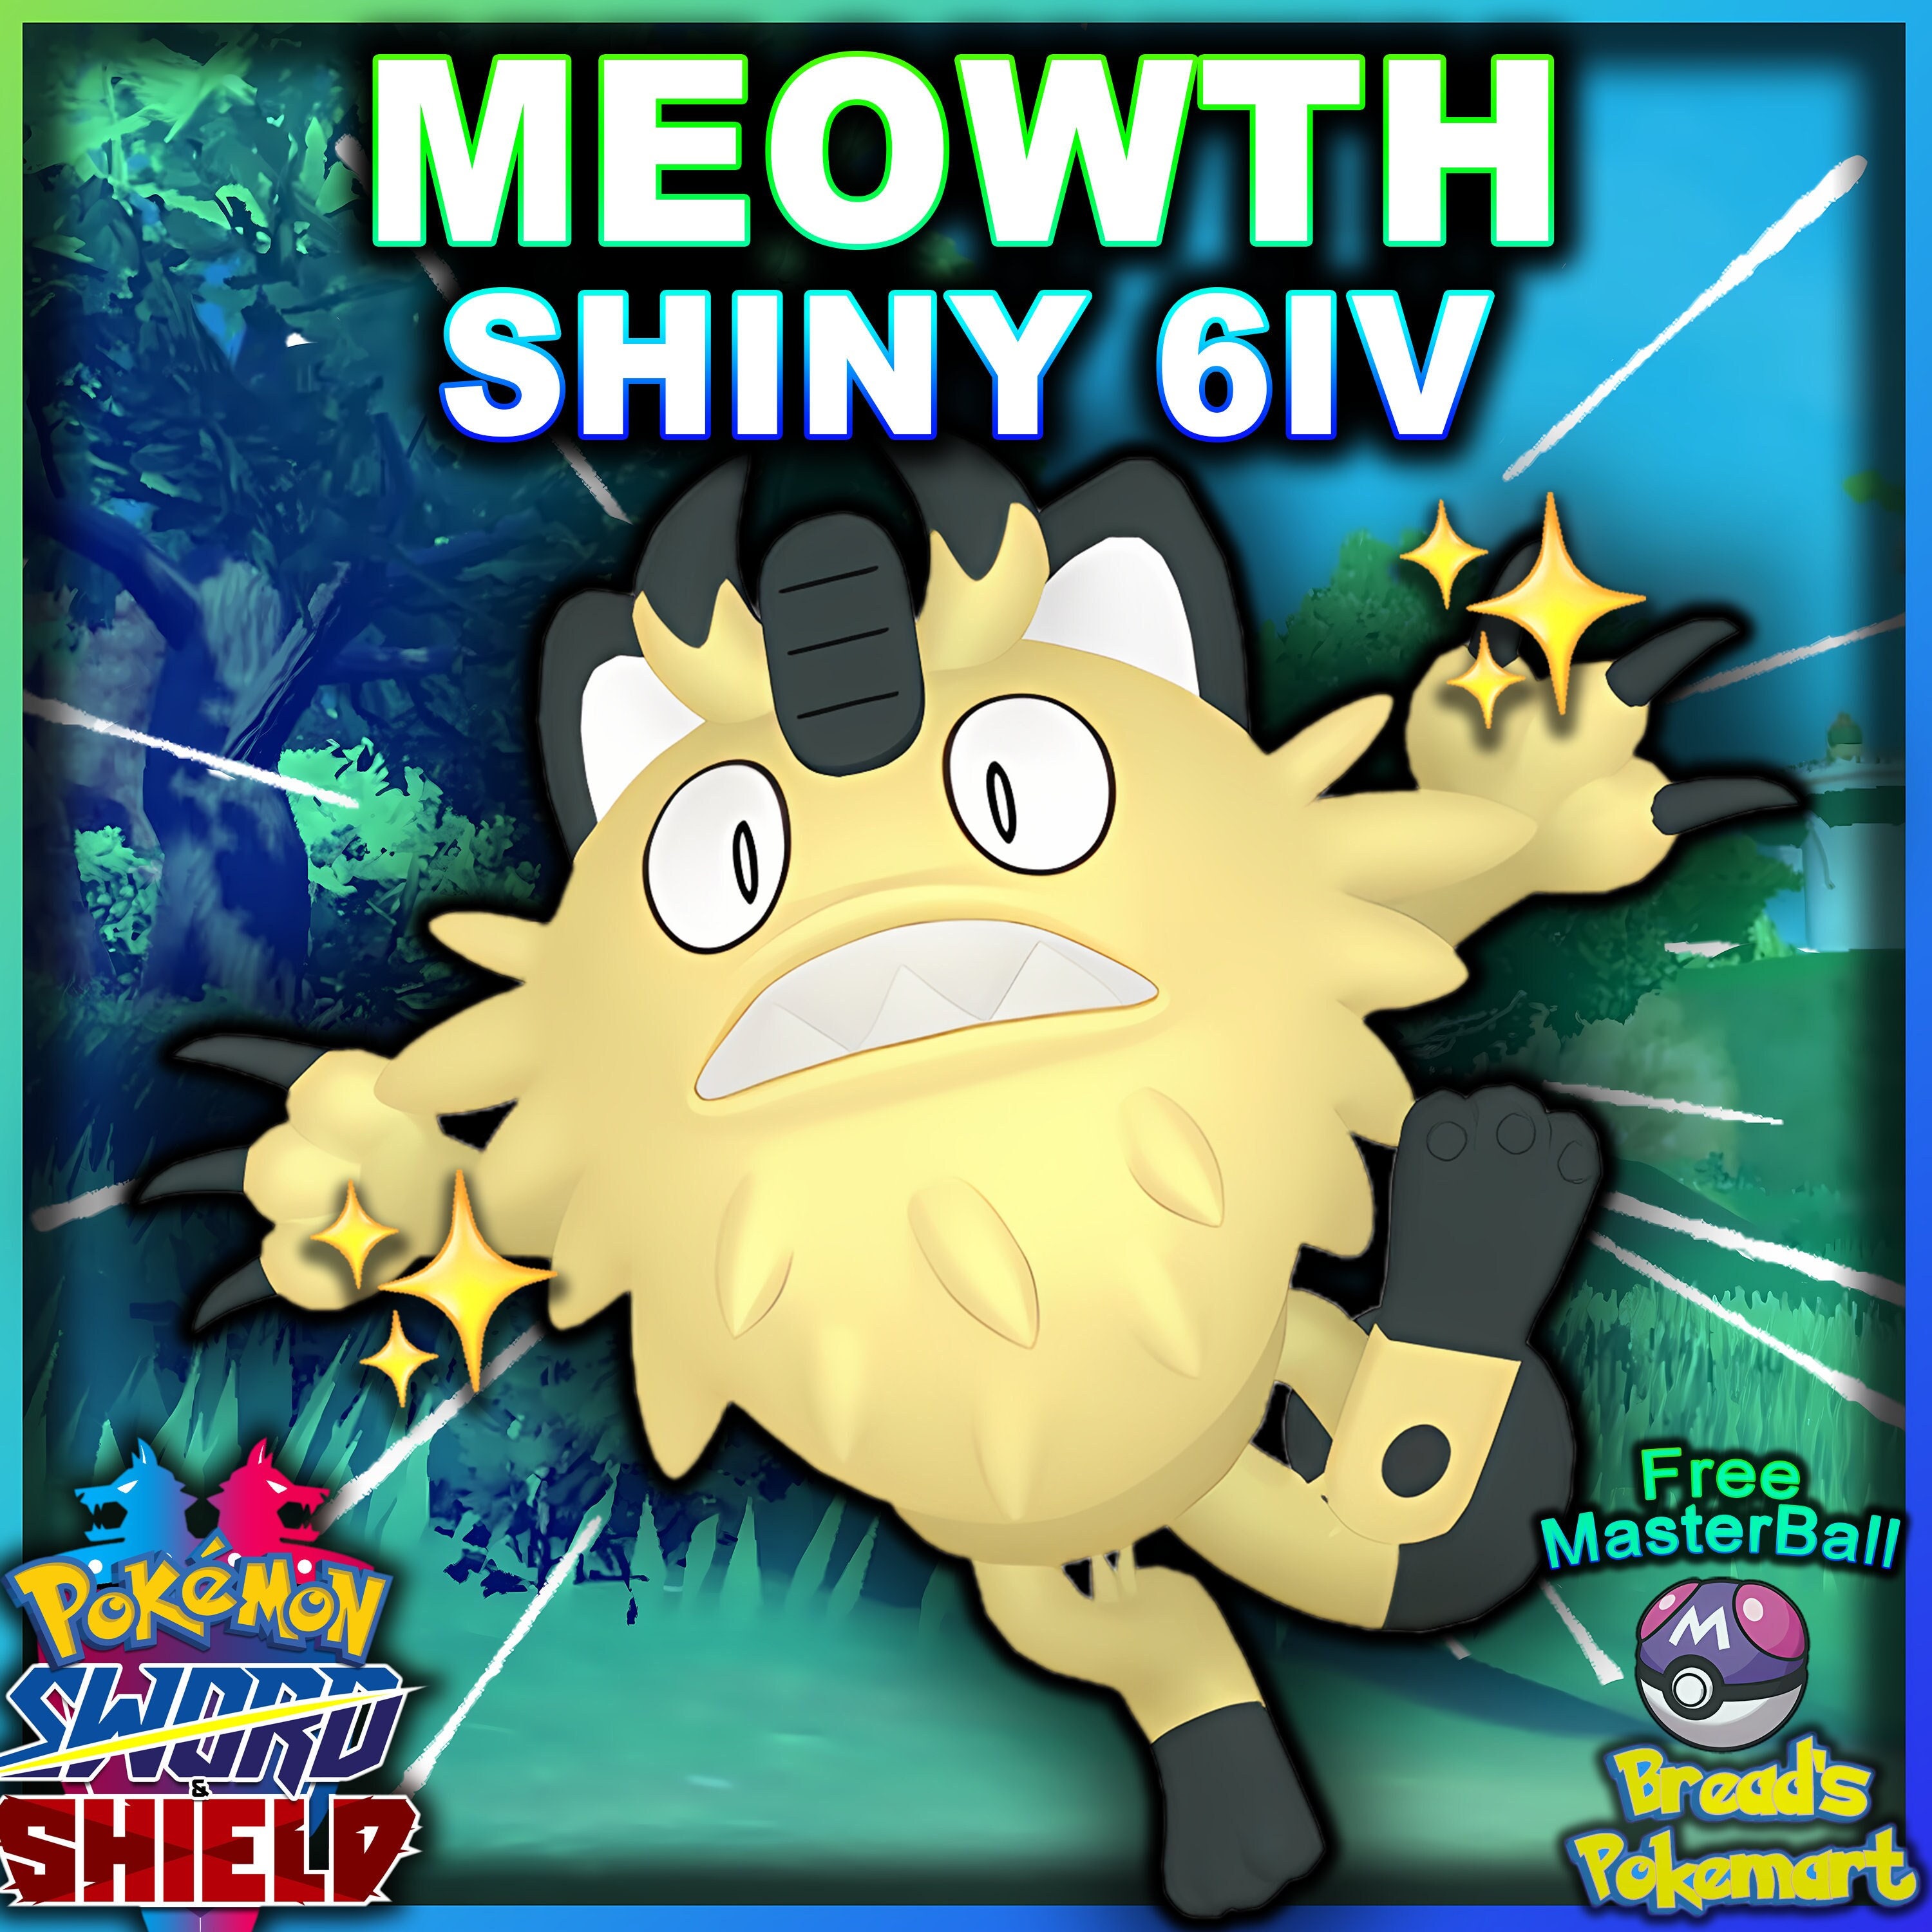 🌟Galarian Forms Pokemon Sword and Shield 6iv Shiny and Free